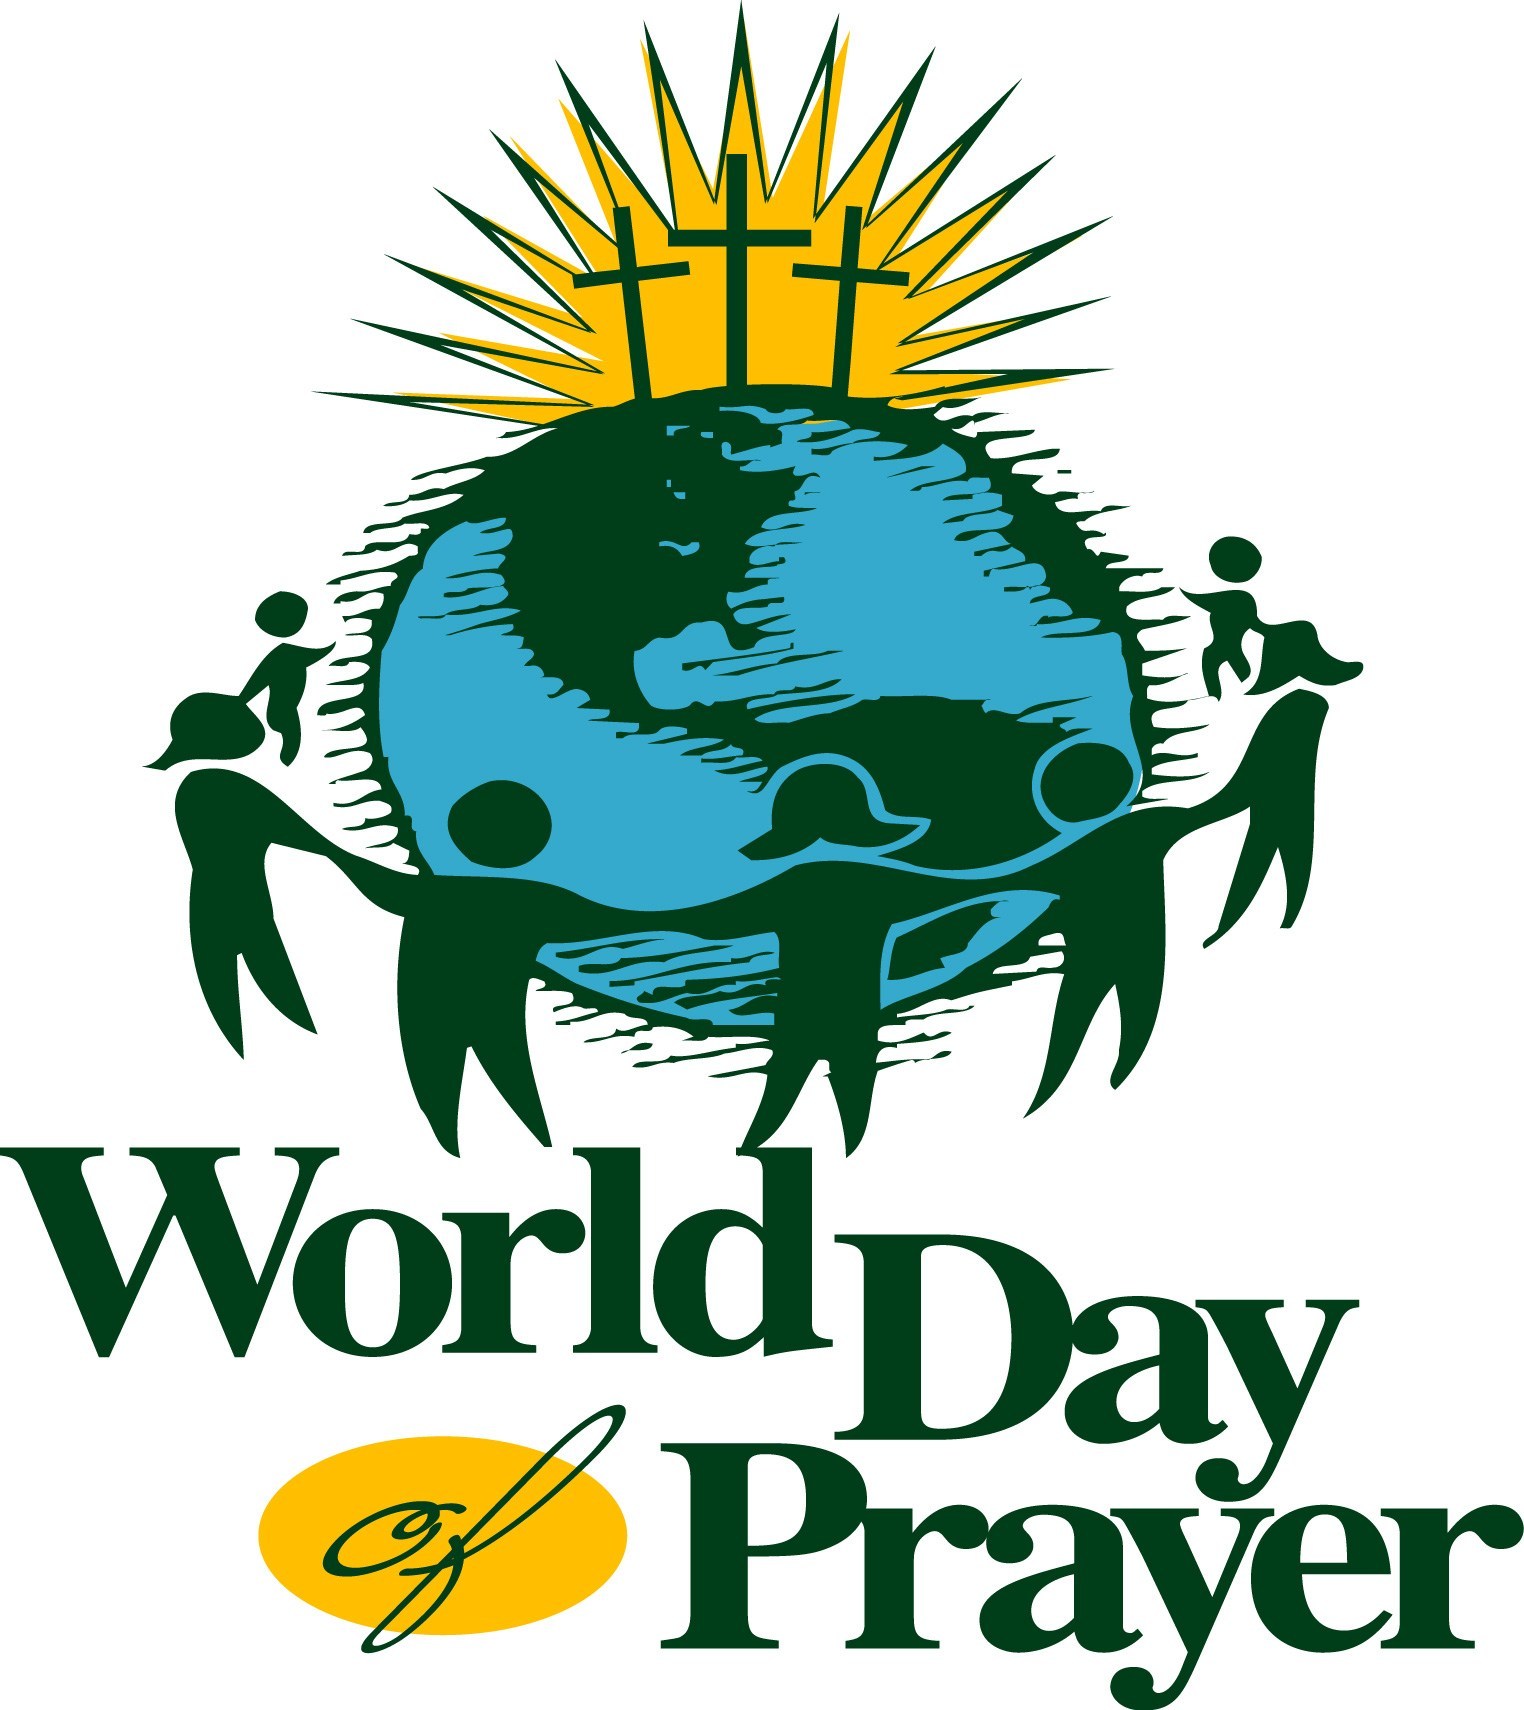 Why I Can't Participate in the World Day of Prayer Glorious Gospel